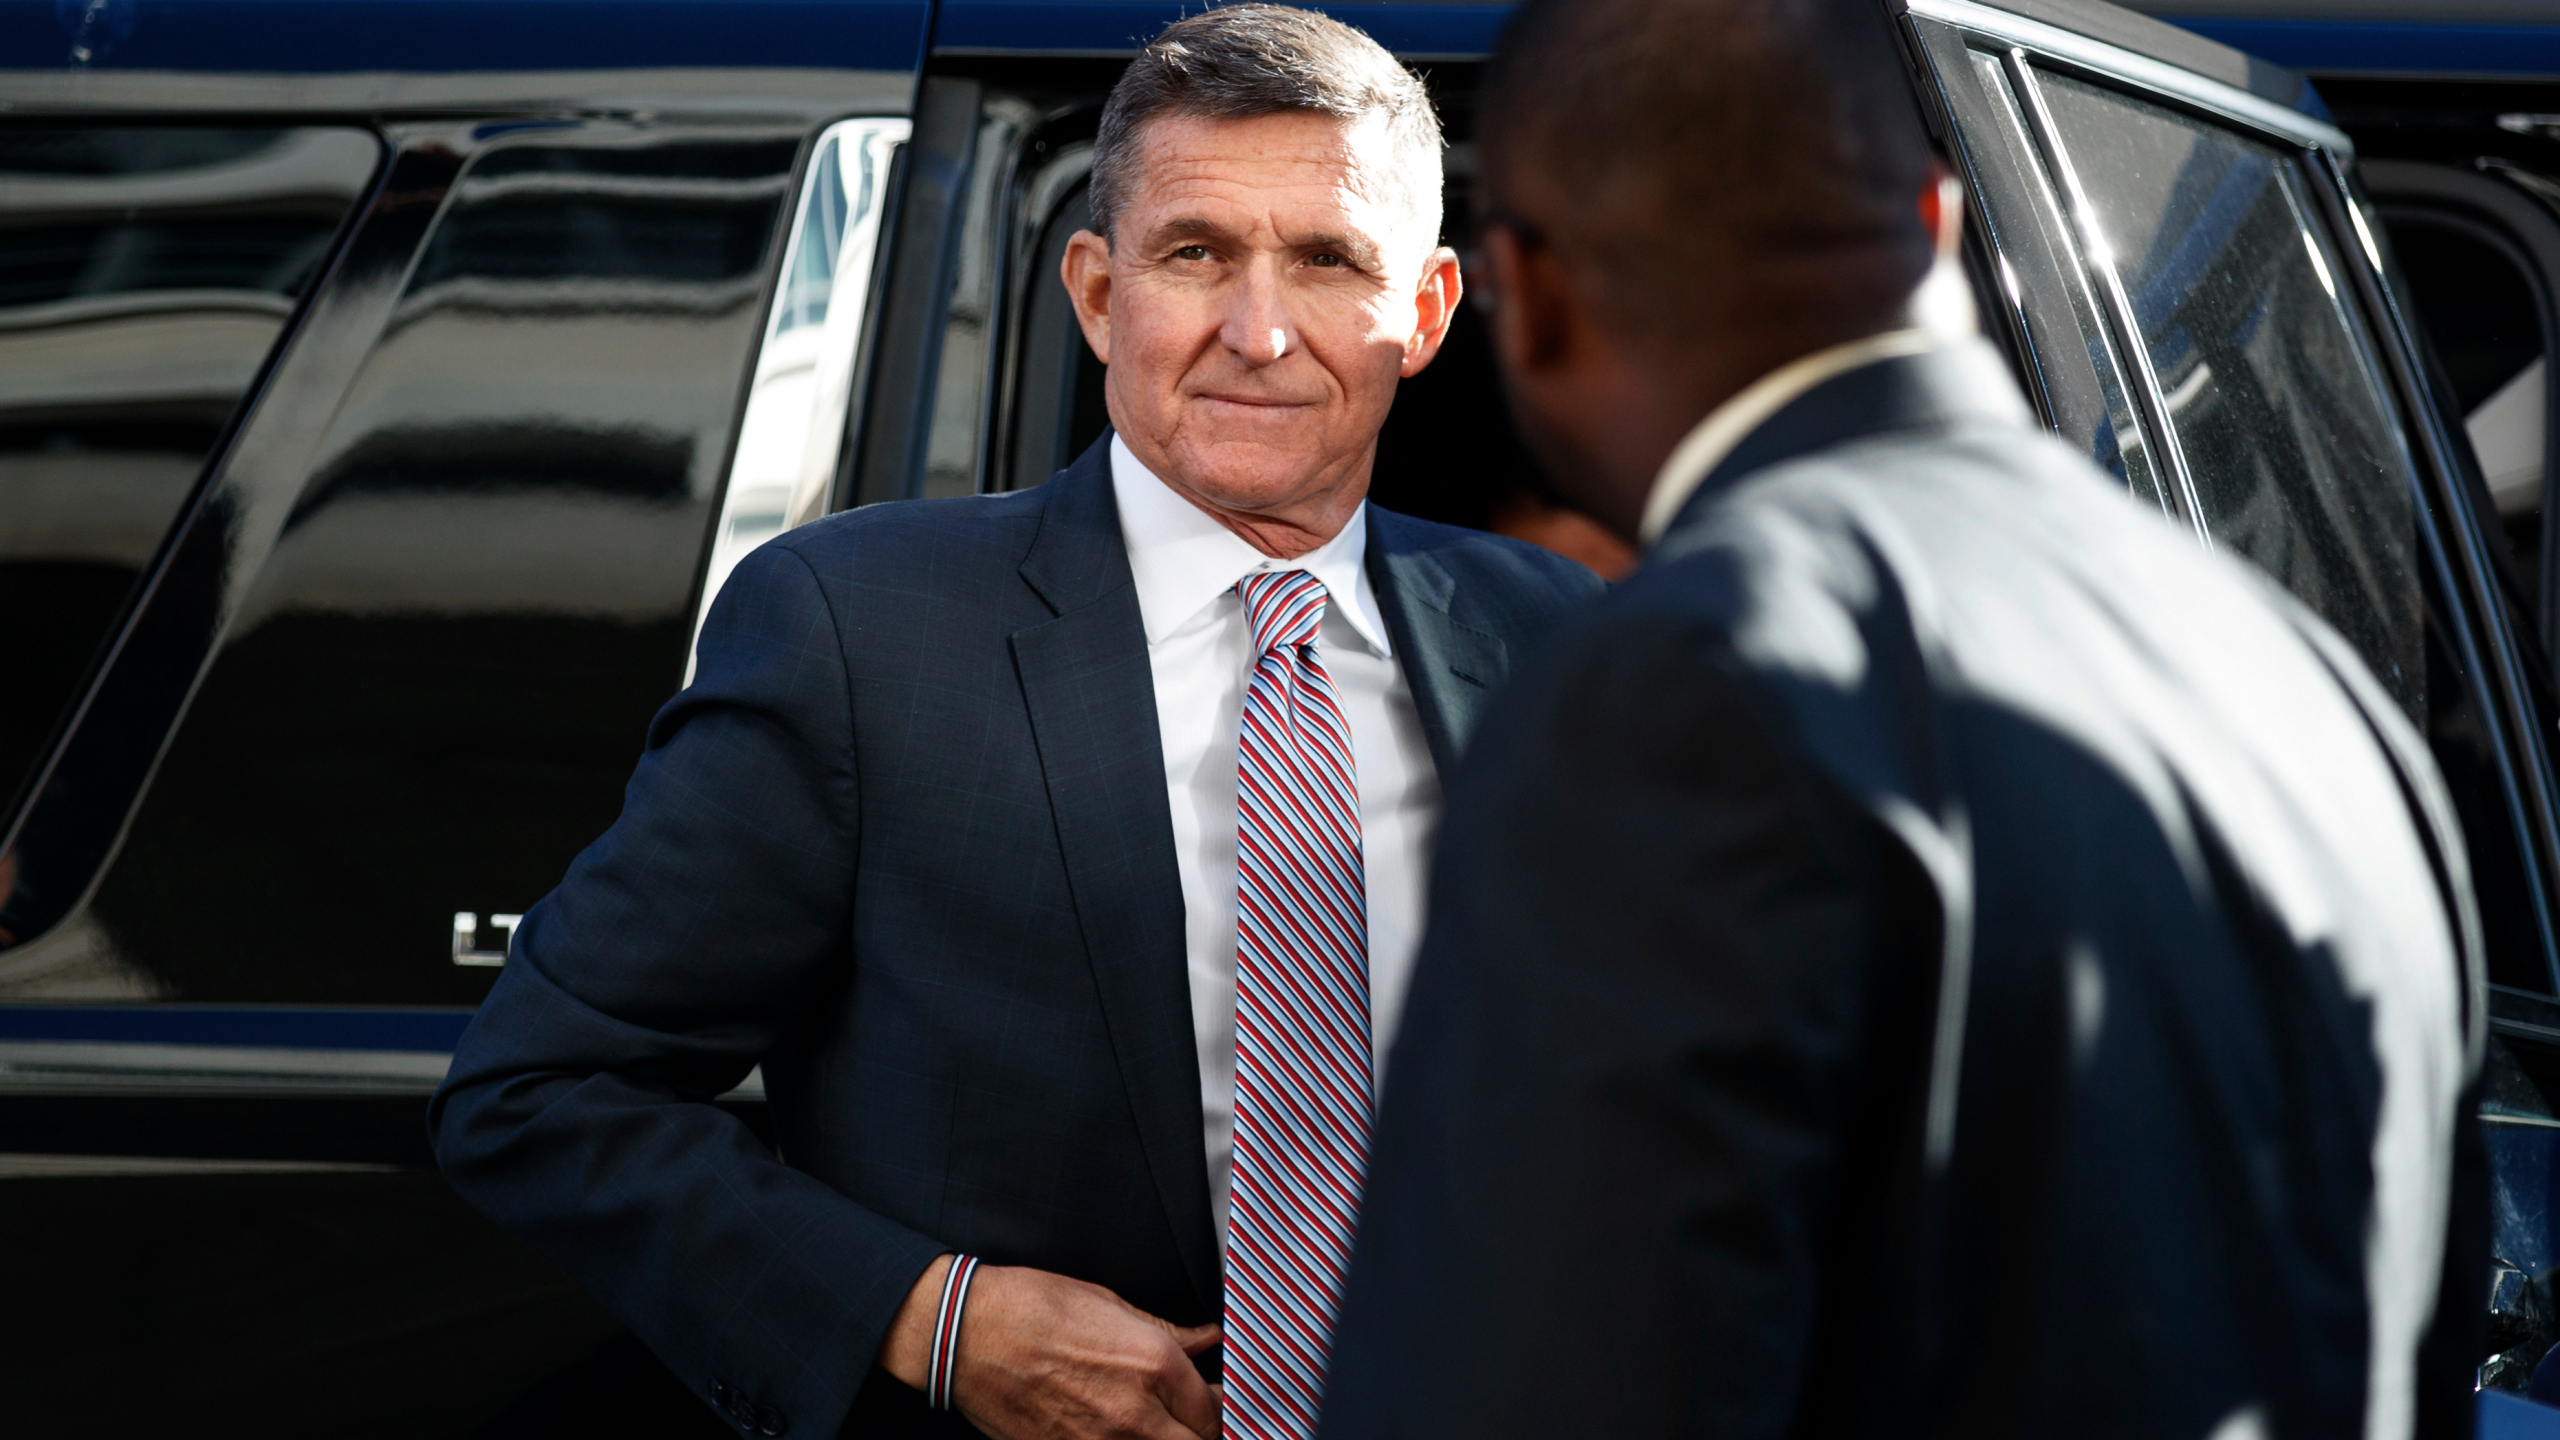 BREAKING NEWS: Appeals court orders federal judge to DROP criminal case against Mike Flynn